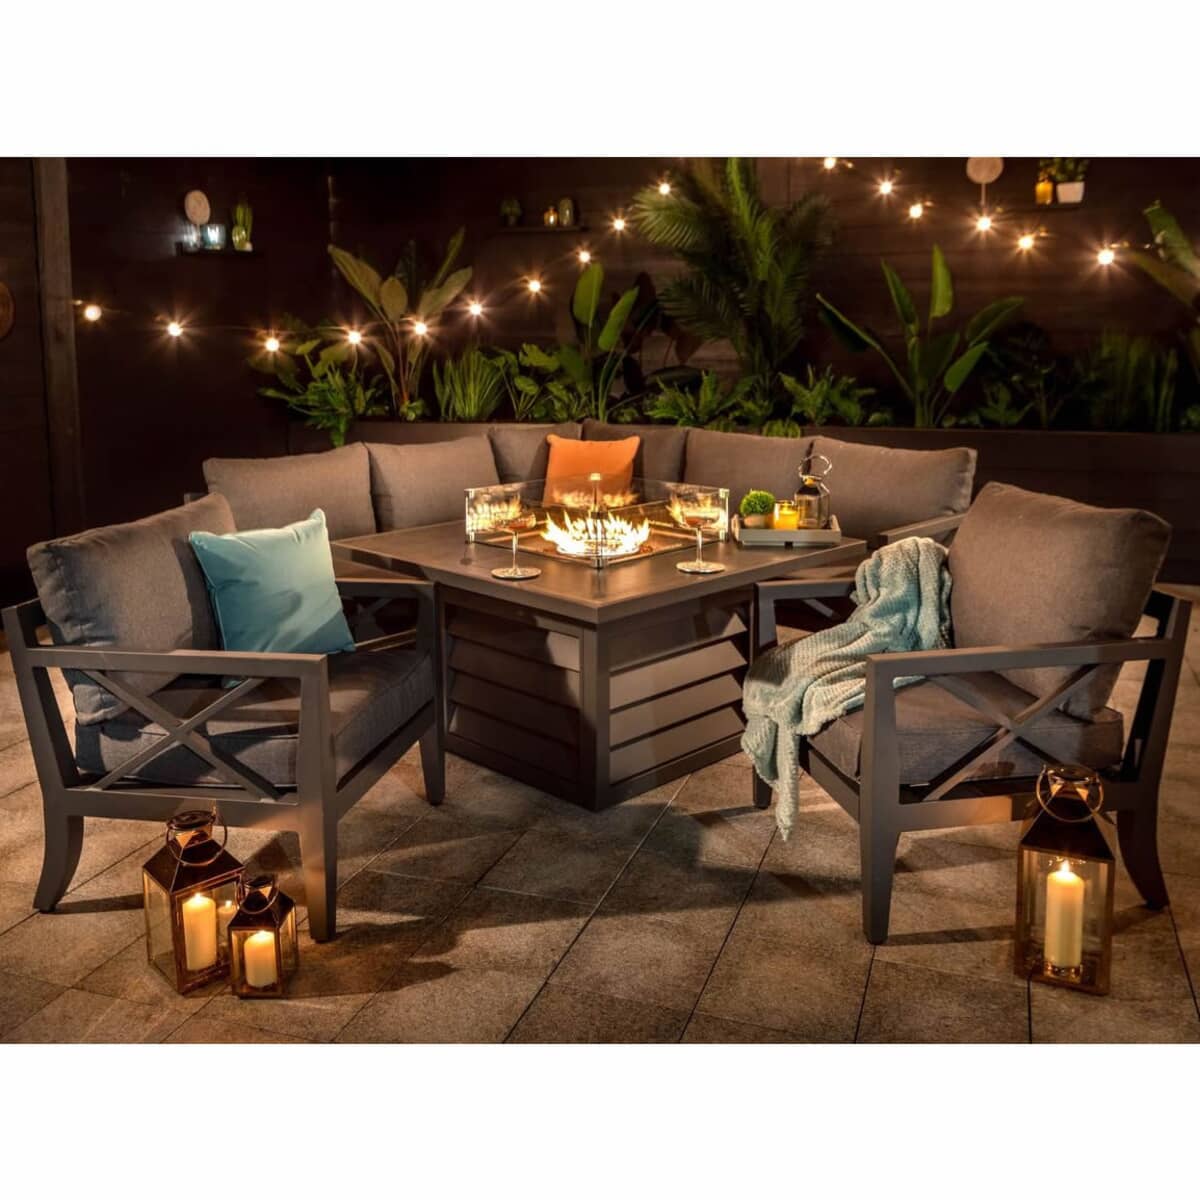 Hartman Sorrento Square Casual Dining Corner Set with Gas Fire Pit with Lounge Chairs Matt Xerix/Slate